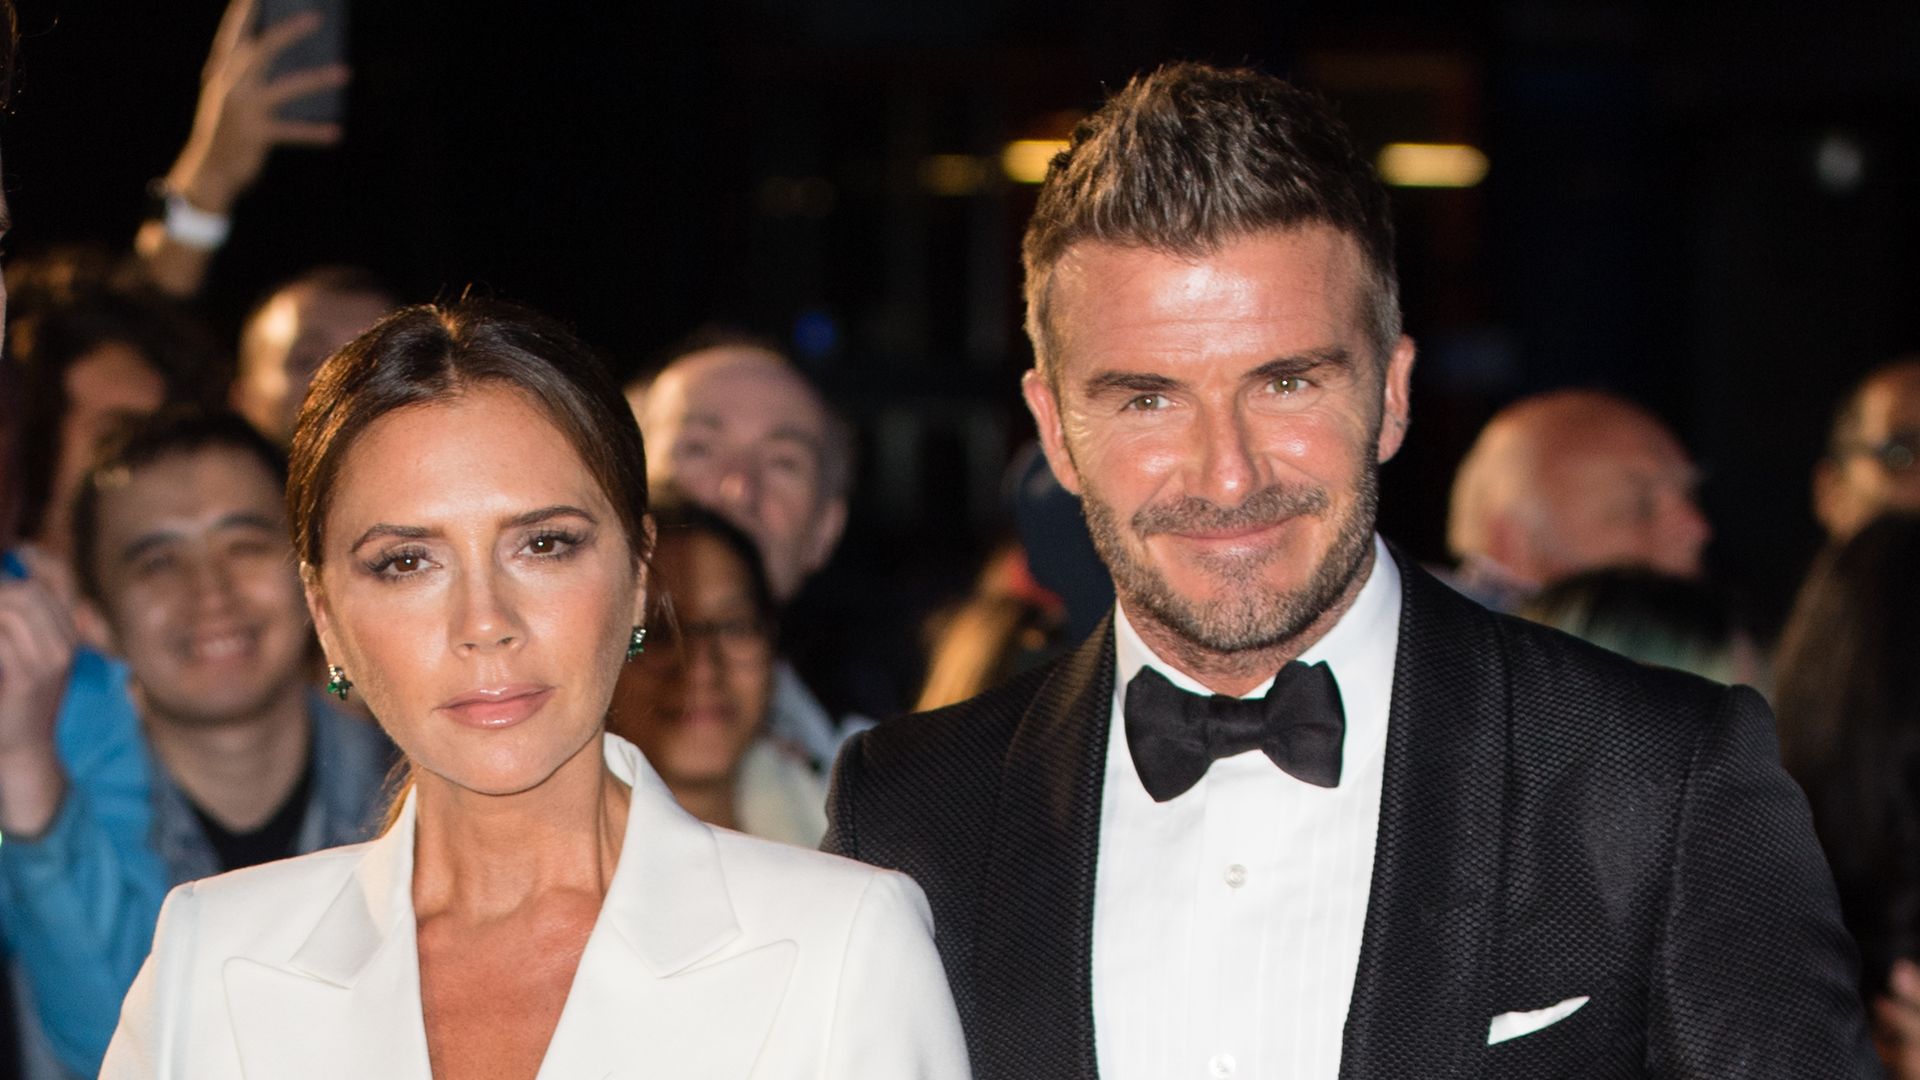 Victoria and David Beckham in a white suit and tuxedo